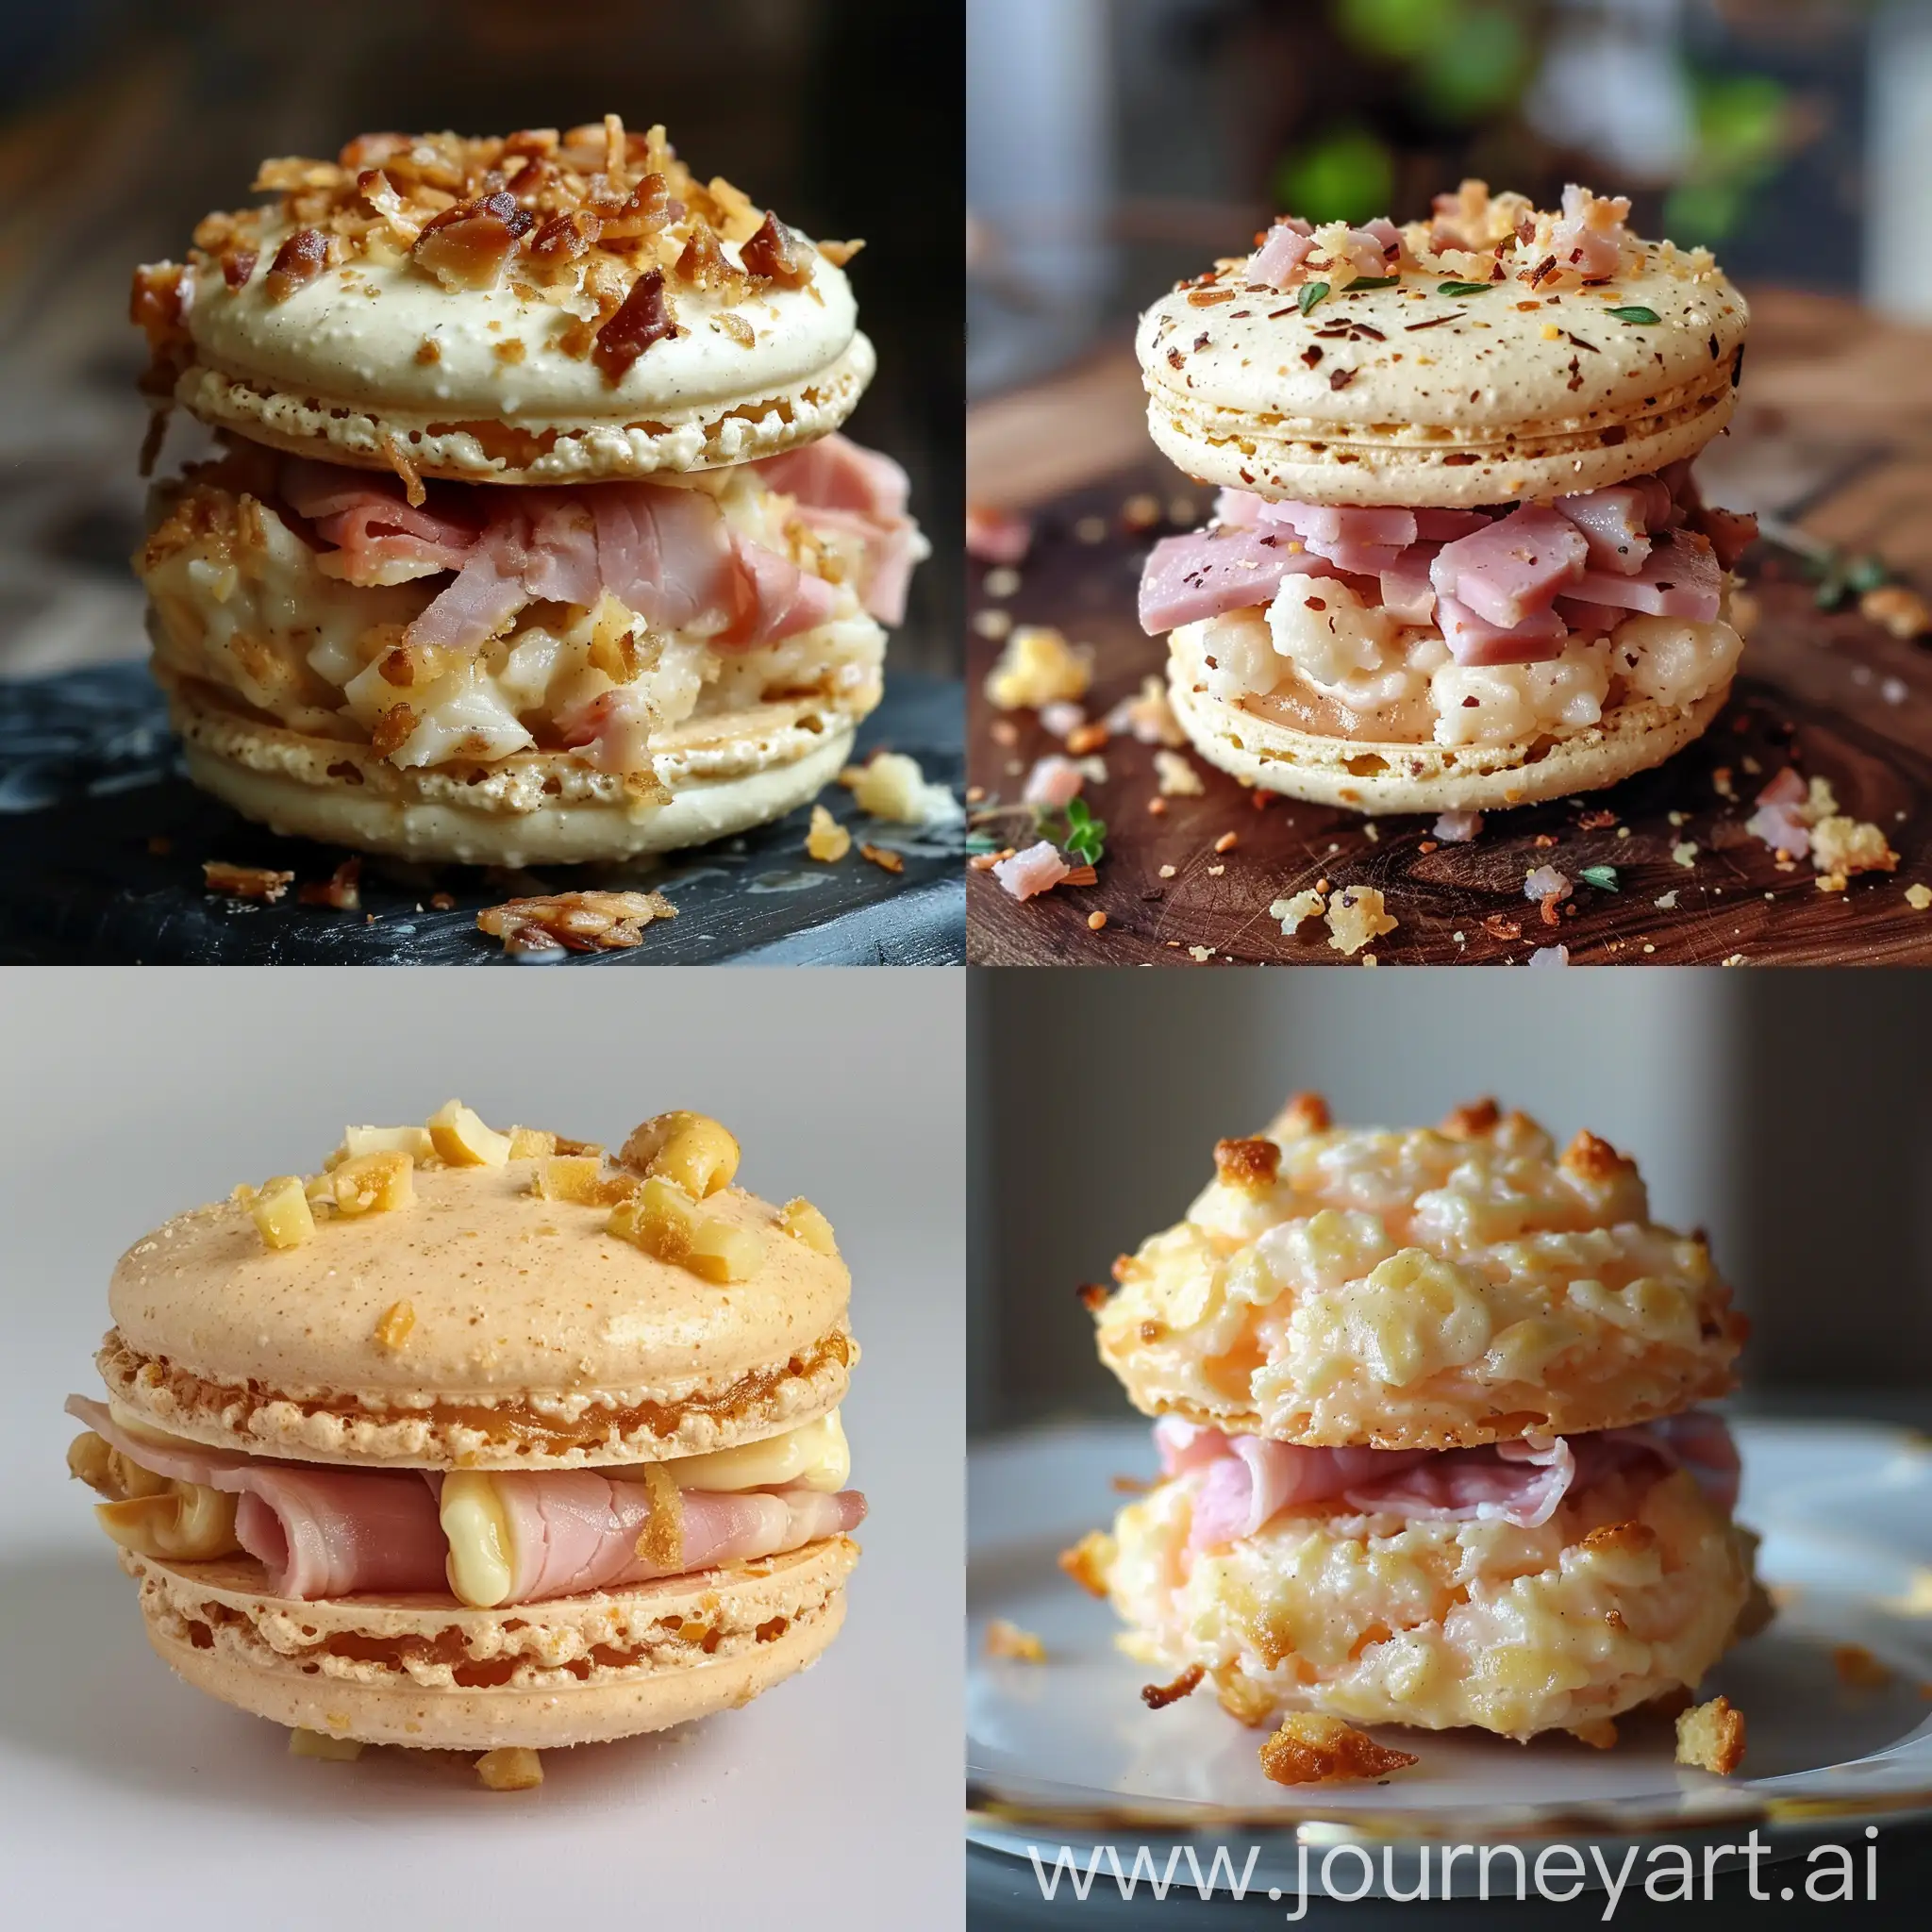 Delicious-HamFilled-Macaroon-Delight-Gourmet-Culinary-Art